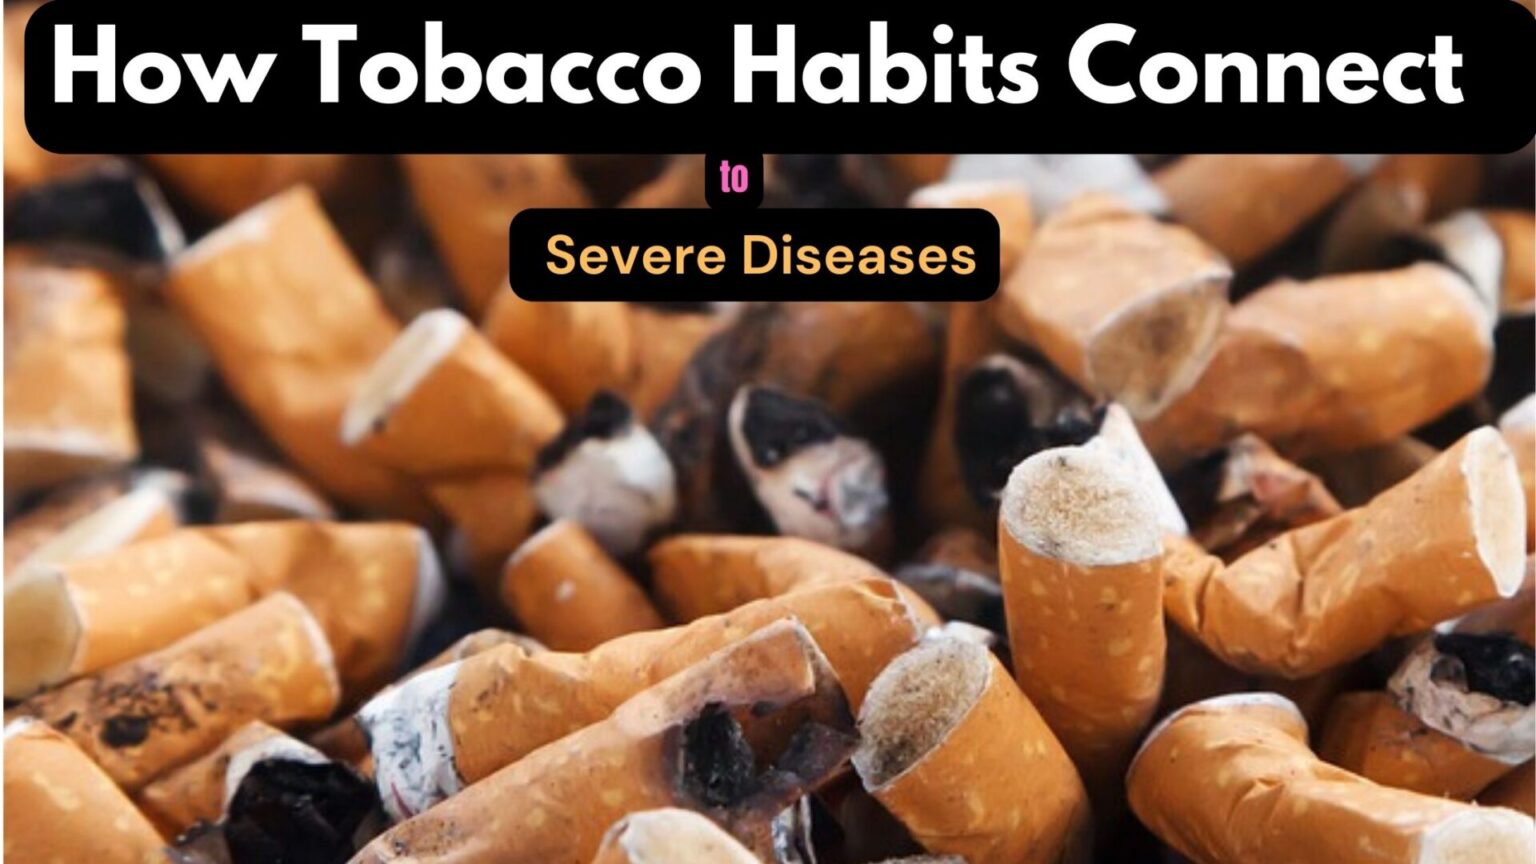 How Tobacco Habits Connect to Severe Diseases